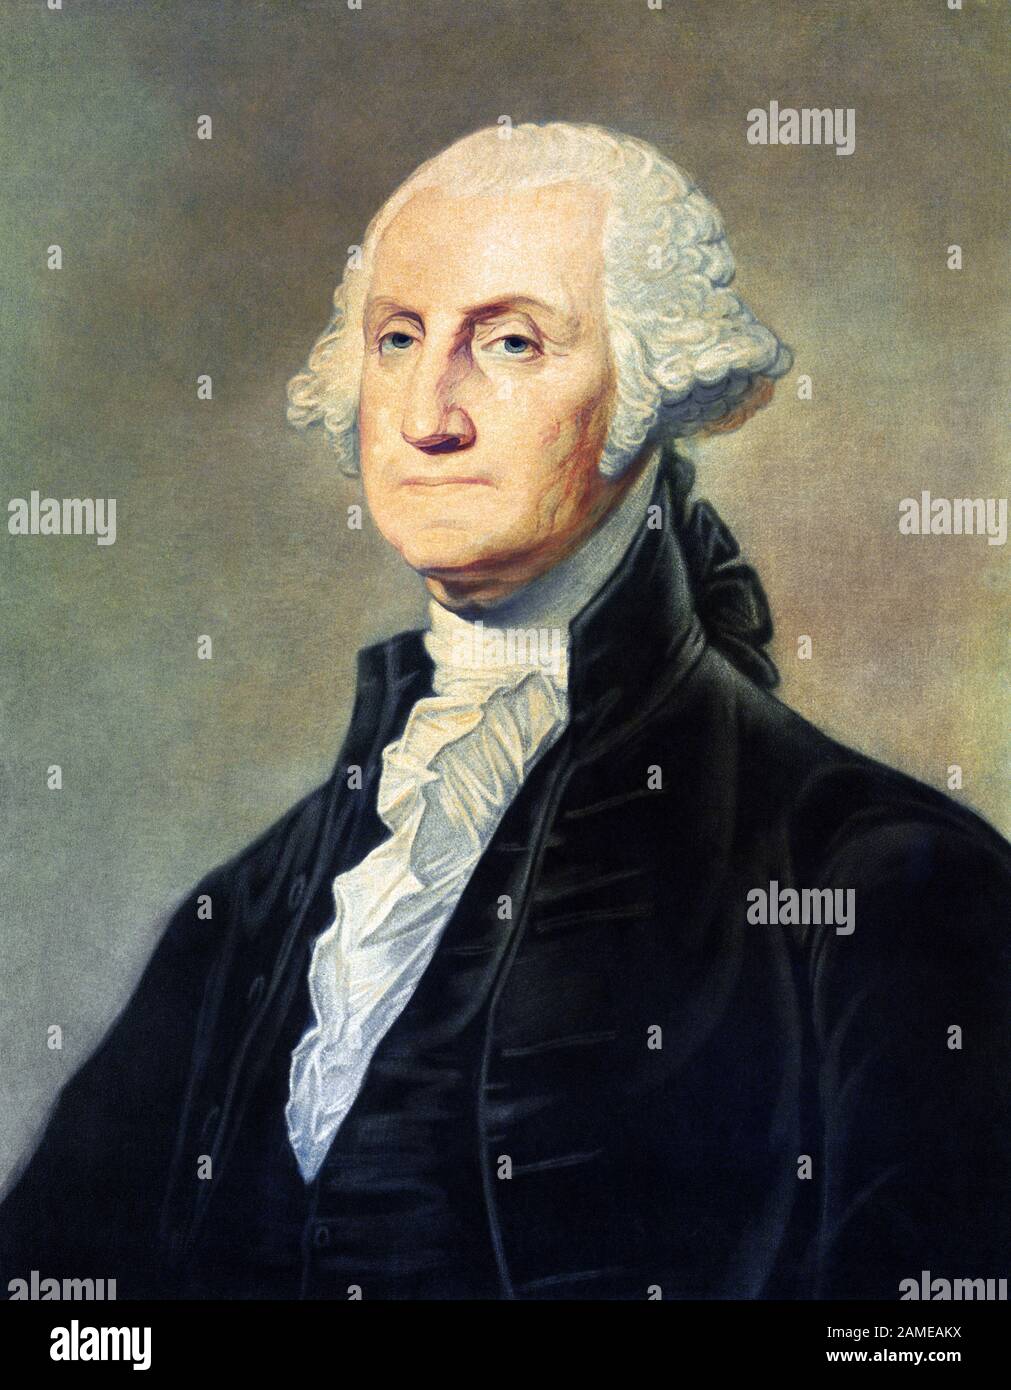 Vintage portrait of George Washington (1732 - 1799) – Commander of the Continental Army in the American Revolutionary War / War of Independence (1775 – 1783) and the first US President (1789 - 1797). Print circa 1813 by Freeman of Philadelphia. Stock Photo